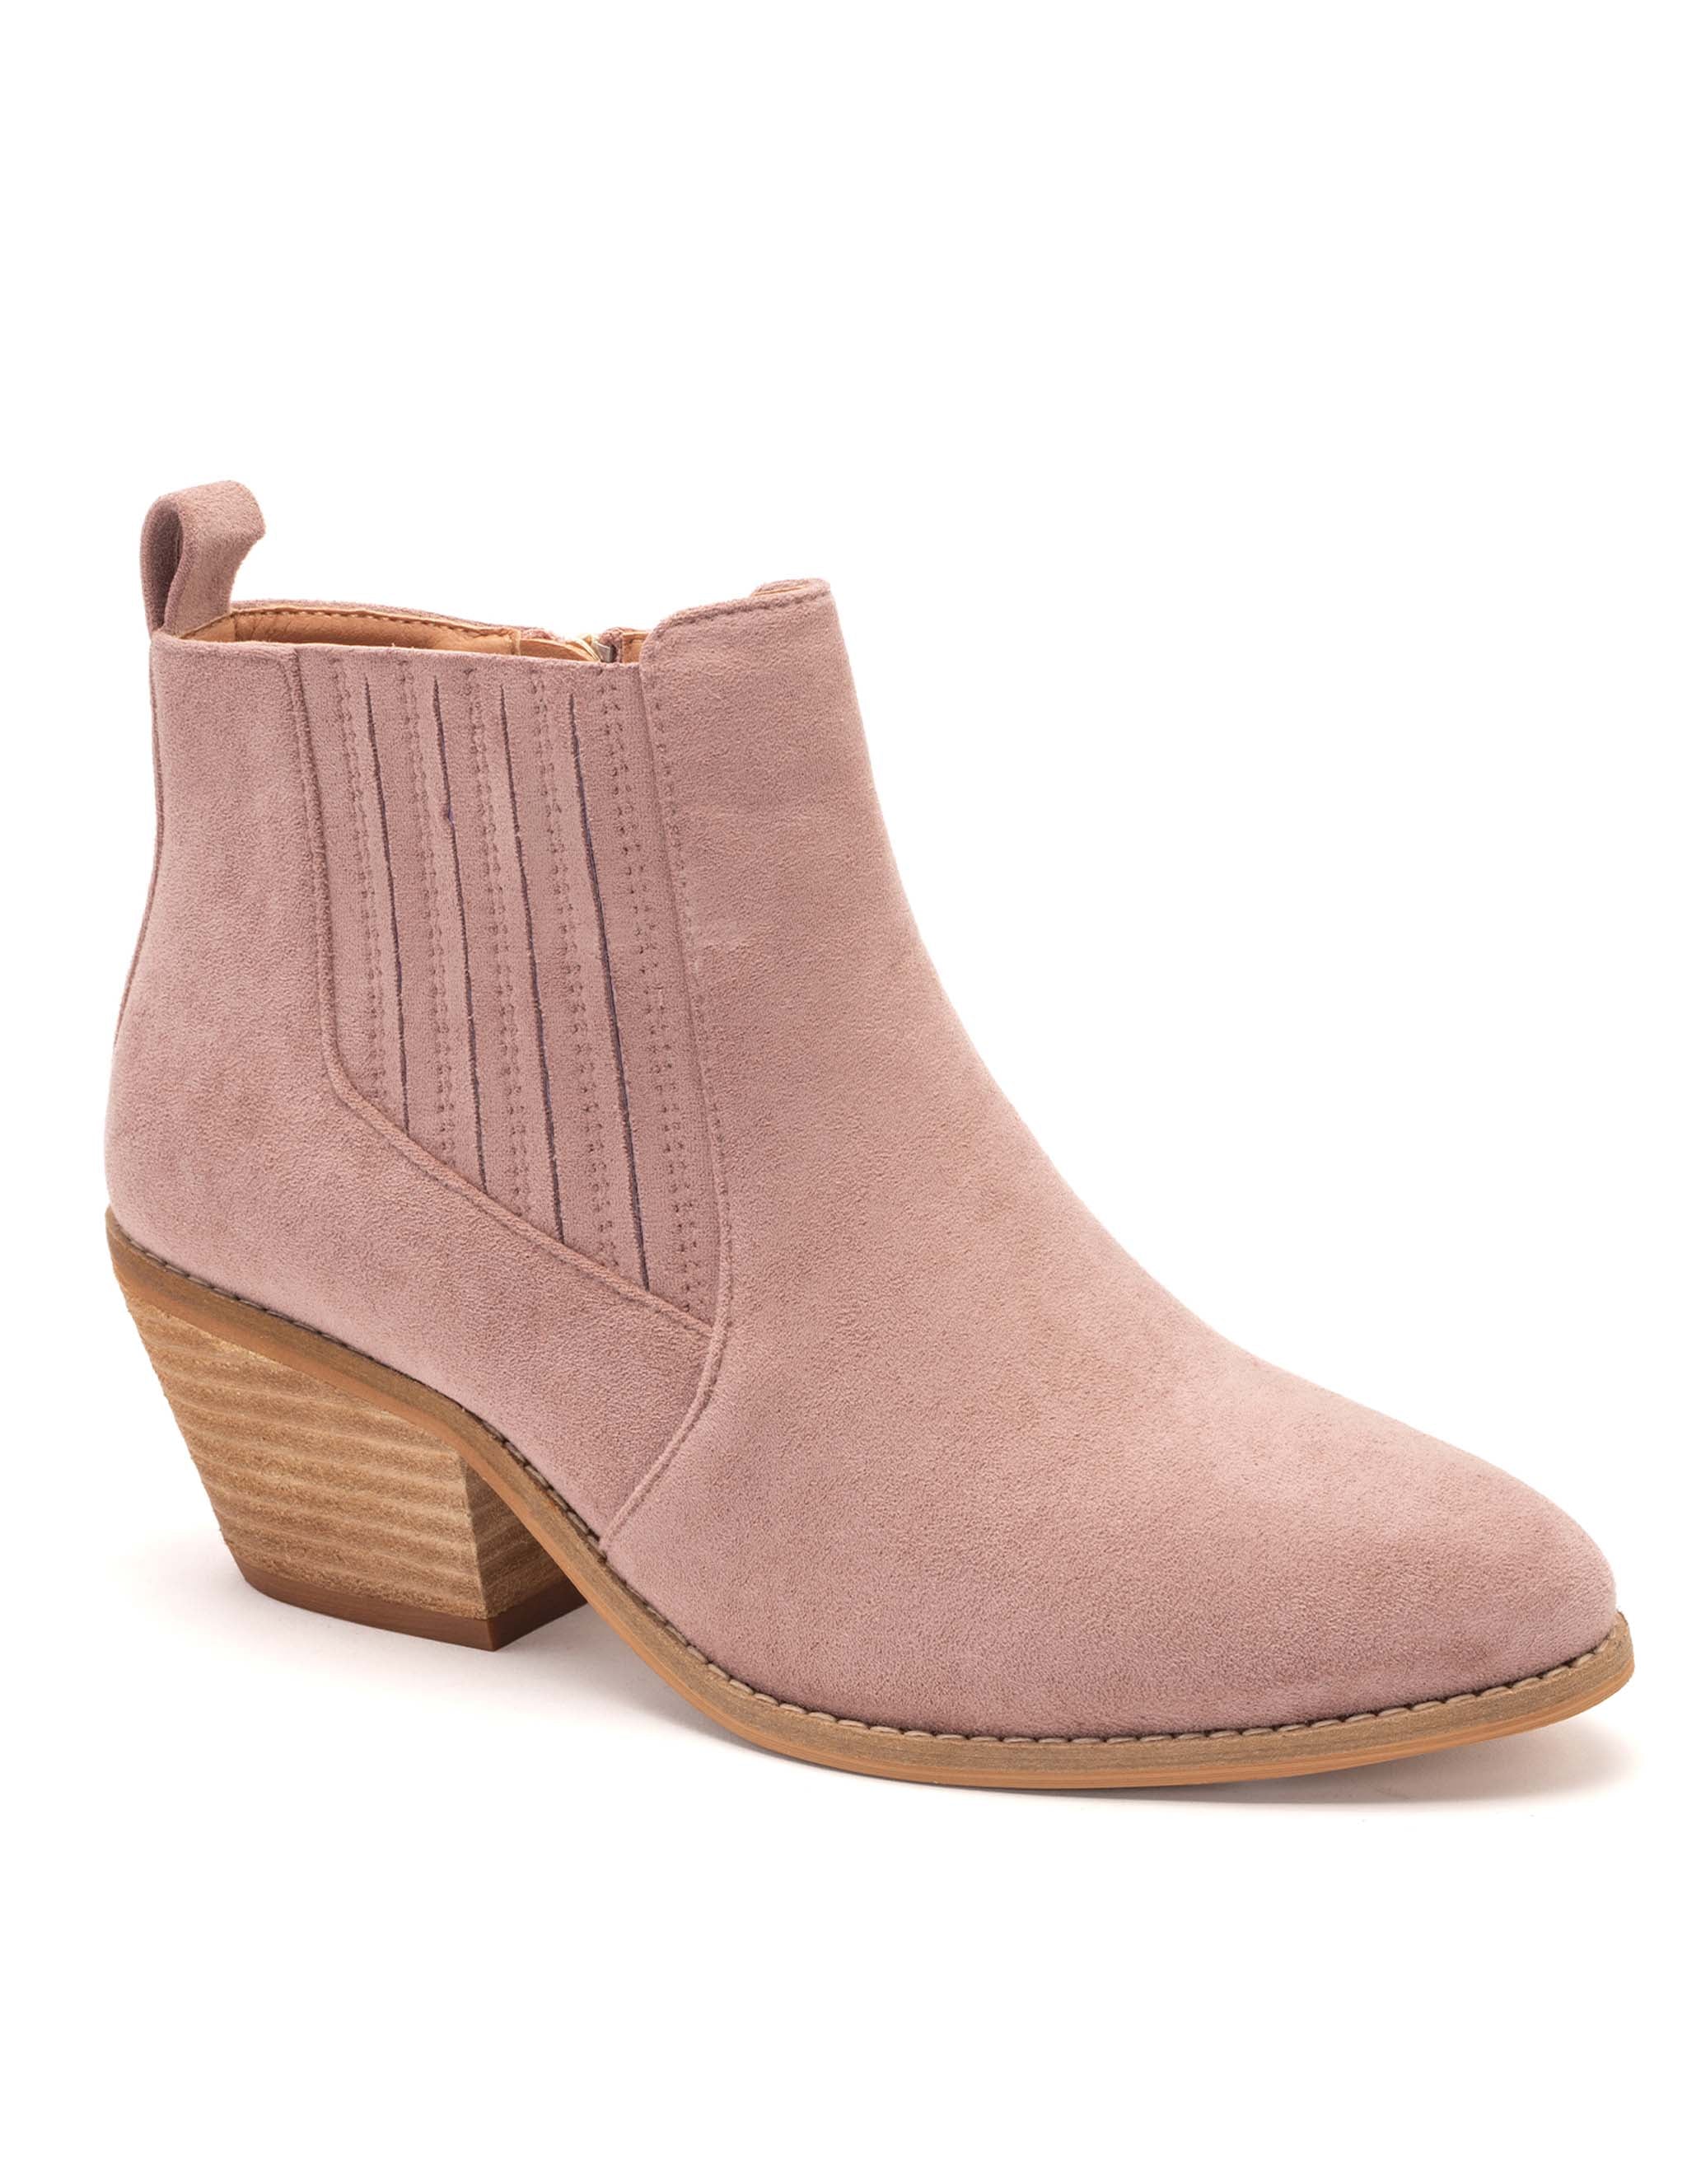 Potion Faux Suede Ankle Boot by Corkys